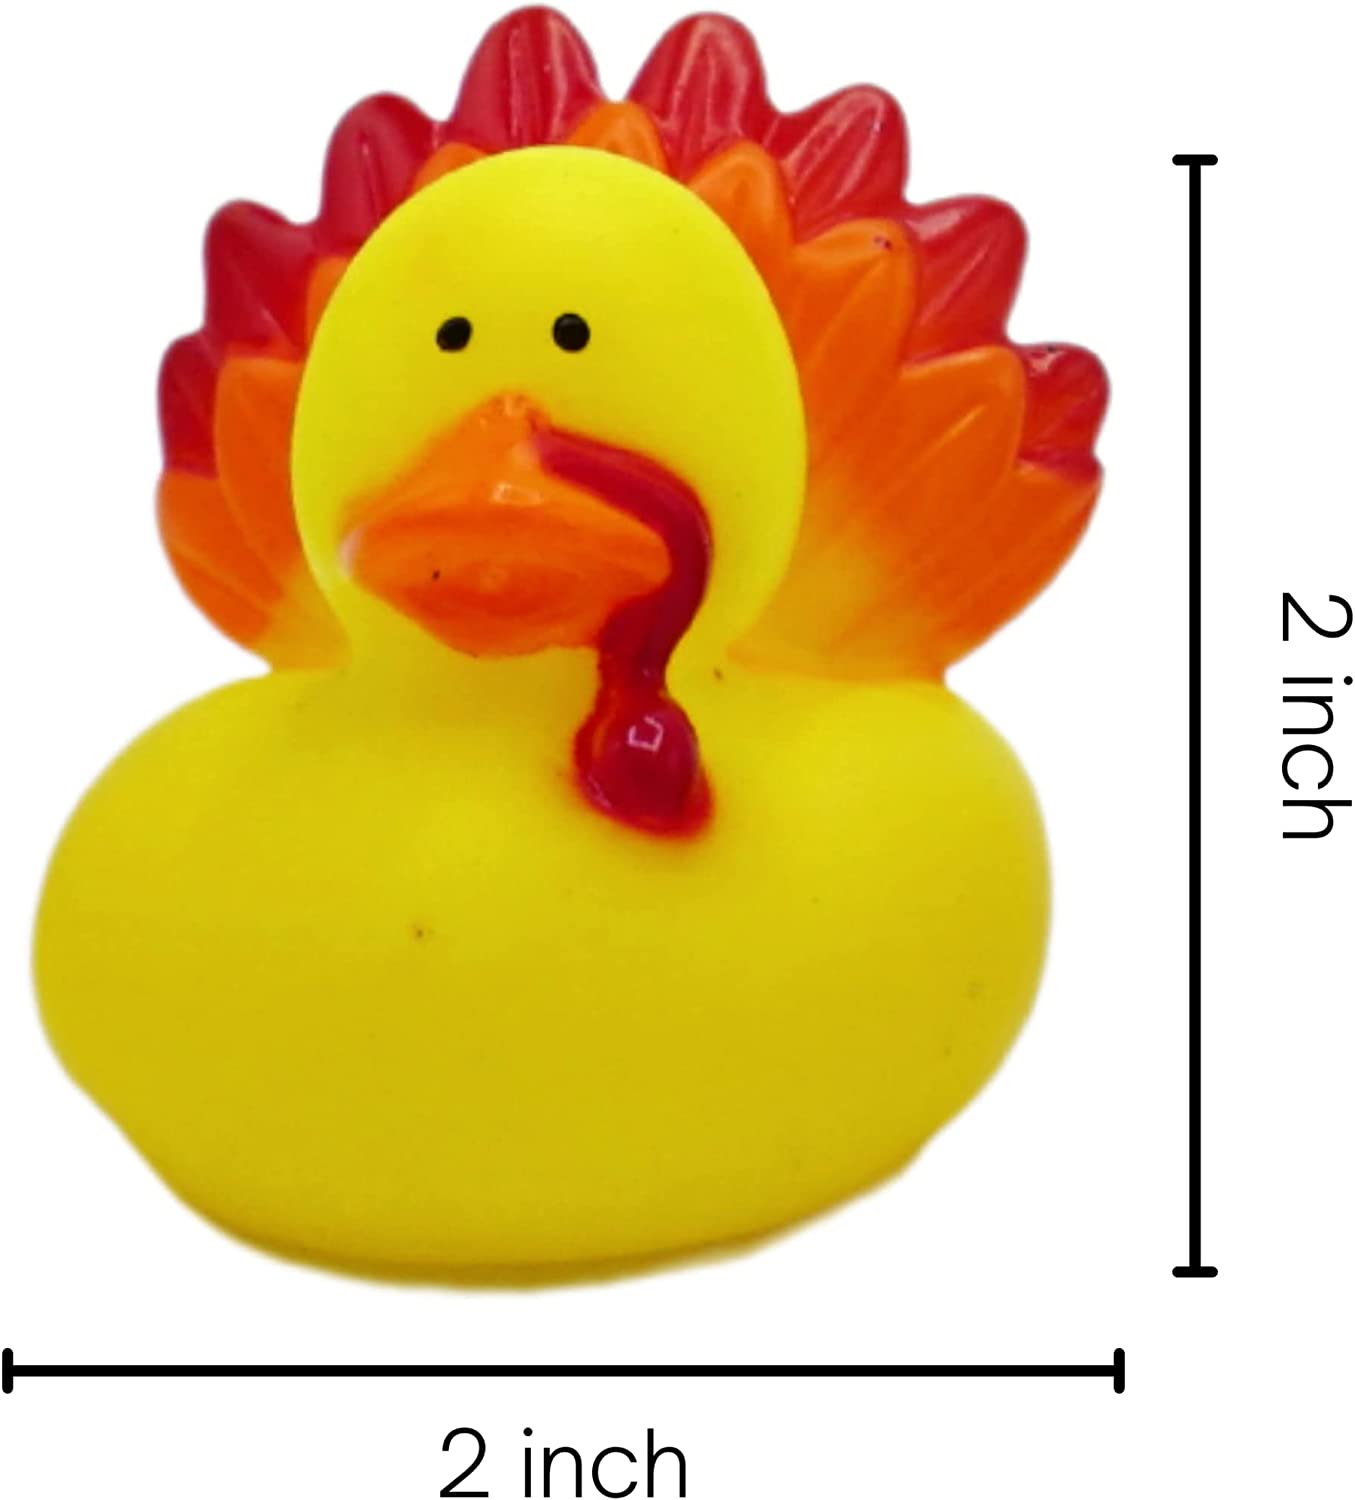 Thanksgiving Rubber Duckies (12 Pack) Thanksgiving Themed Rubber Ducks Turkey & Pilgrim Ducks, Thanksgiving Party Favors Supplies for Kids, Table Centerpiece Vinyl 2.5" - for Kids Bath Toys, Jeep Ducking by 4E's Novelty